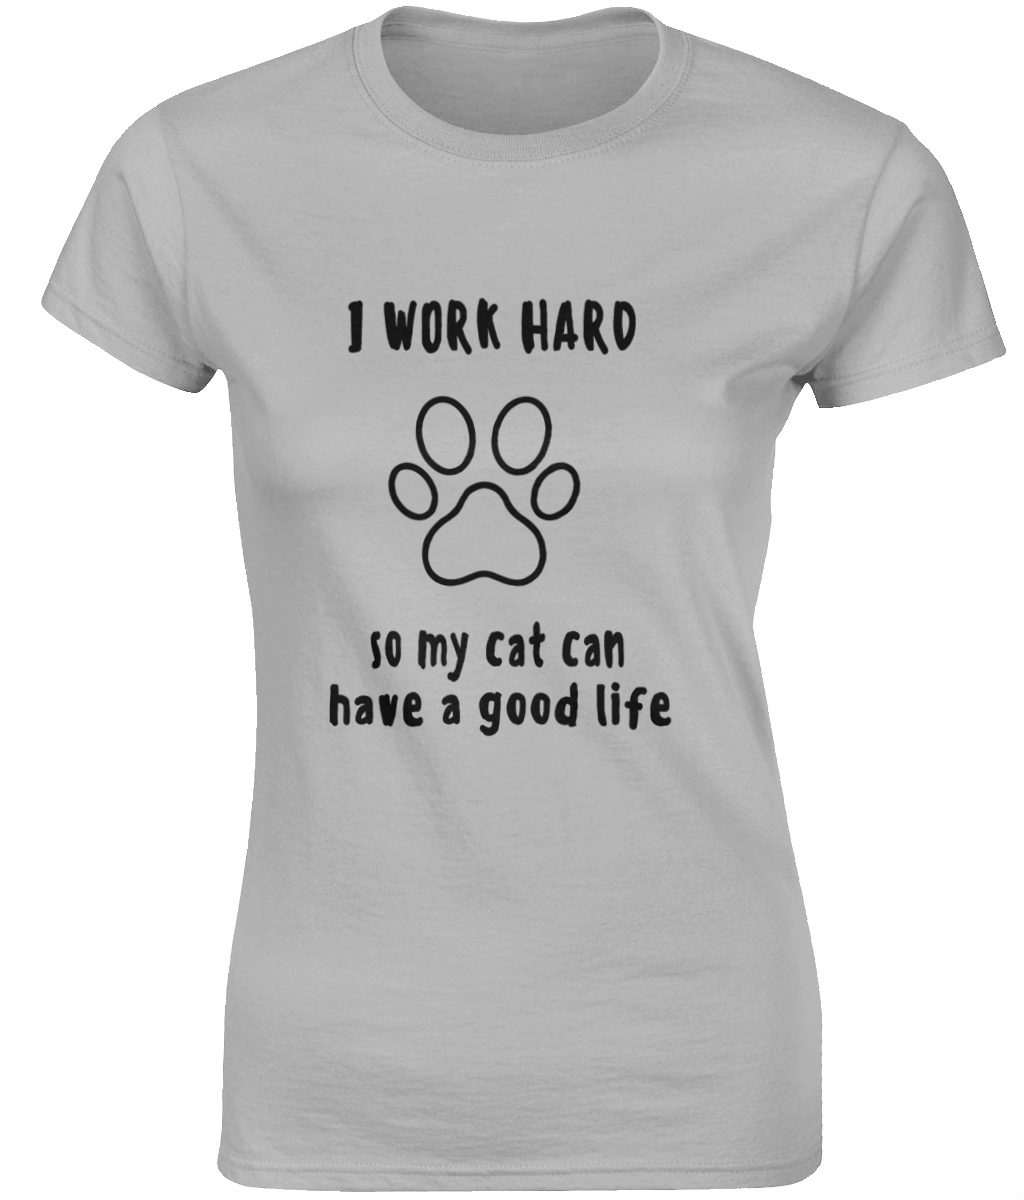 I Work Hard So My Cat Can Have A Good Life | Gildan SoftStyle® Ladies Fitted Ringspun T-Shirt.